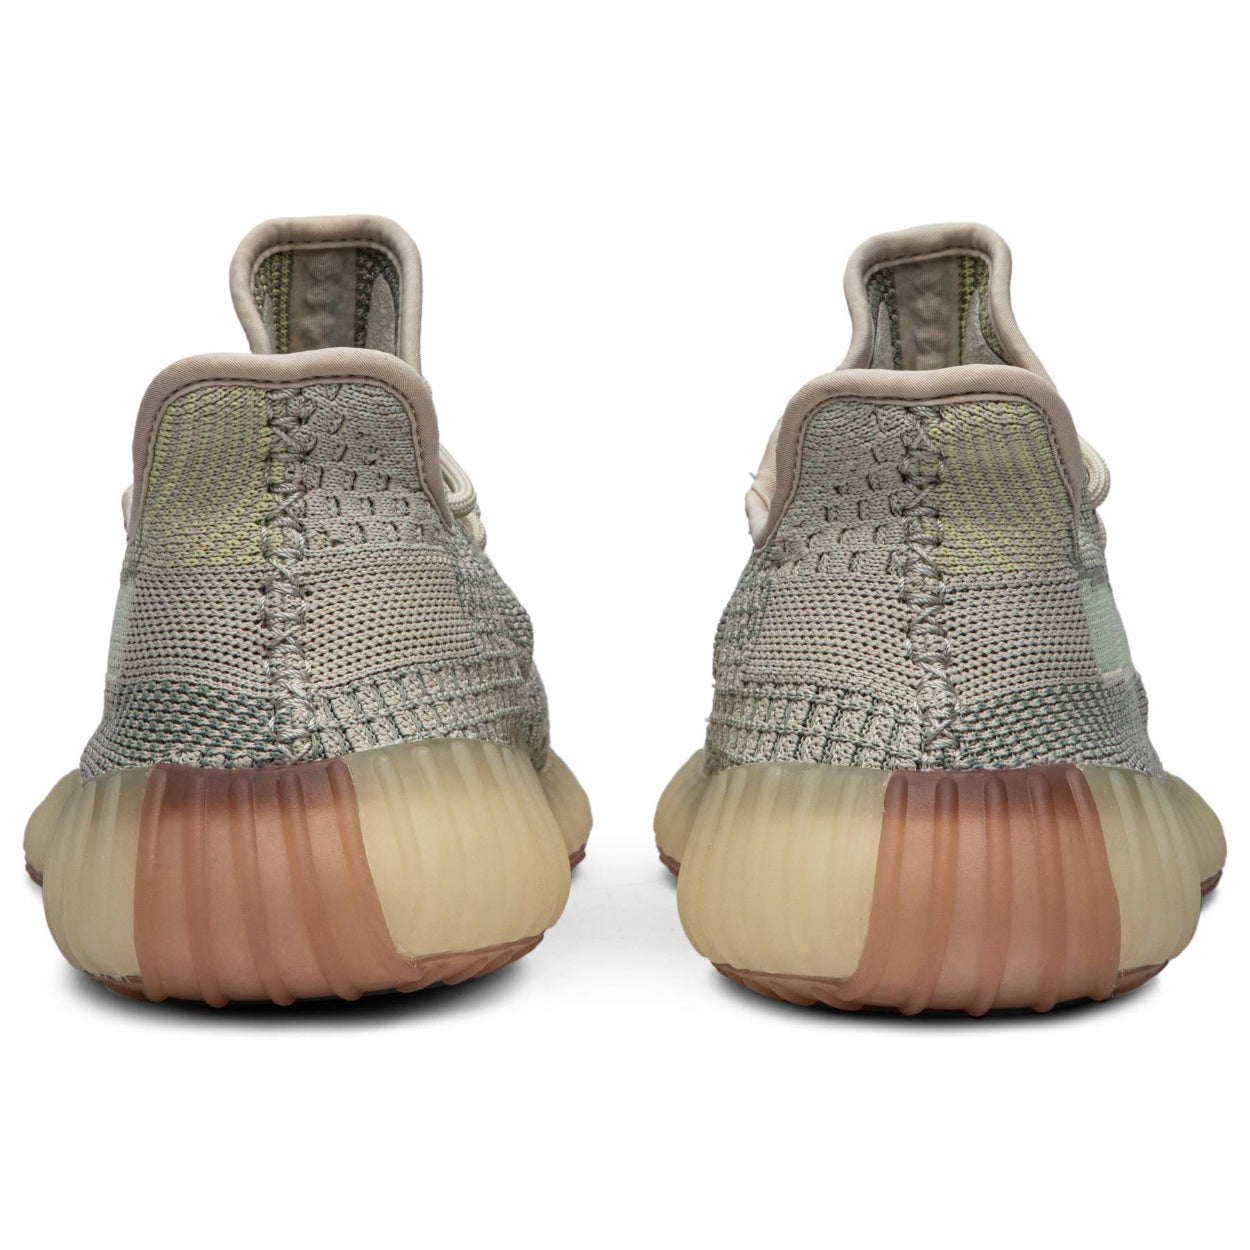 adidas Yeezy Boost 350 V2 'Citrin Non-Reflective' - After Burn